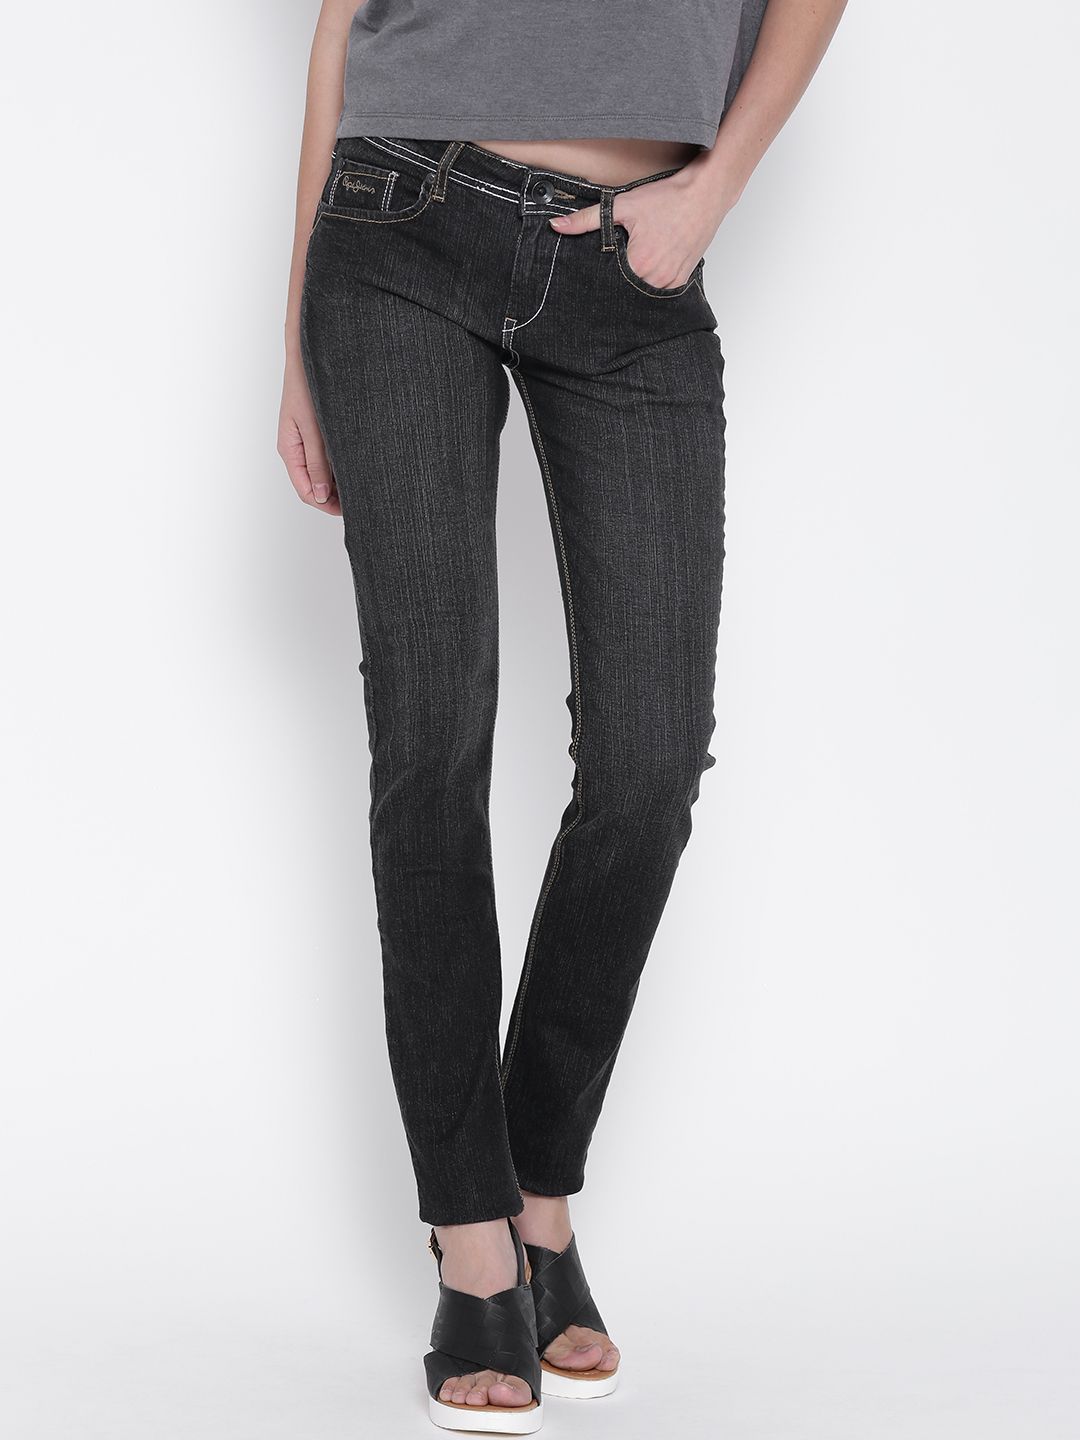 Pepe Jeans Grey Frisky Fit Jeans Price in India